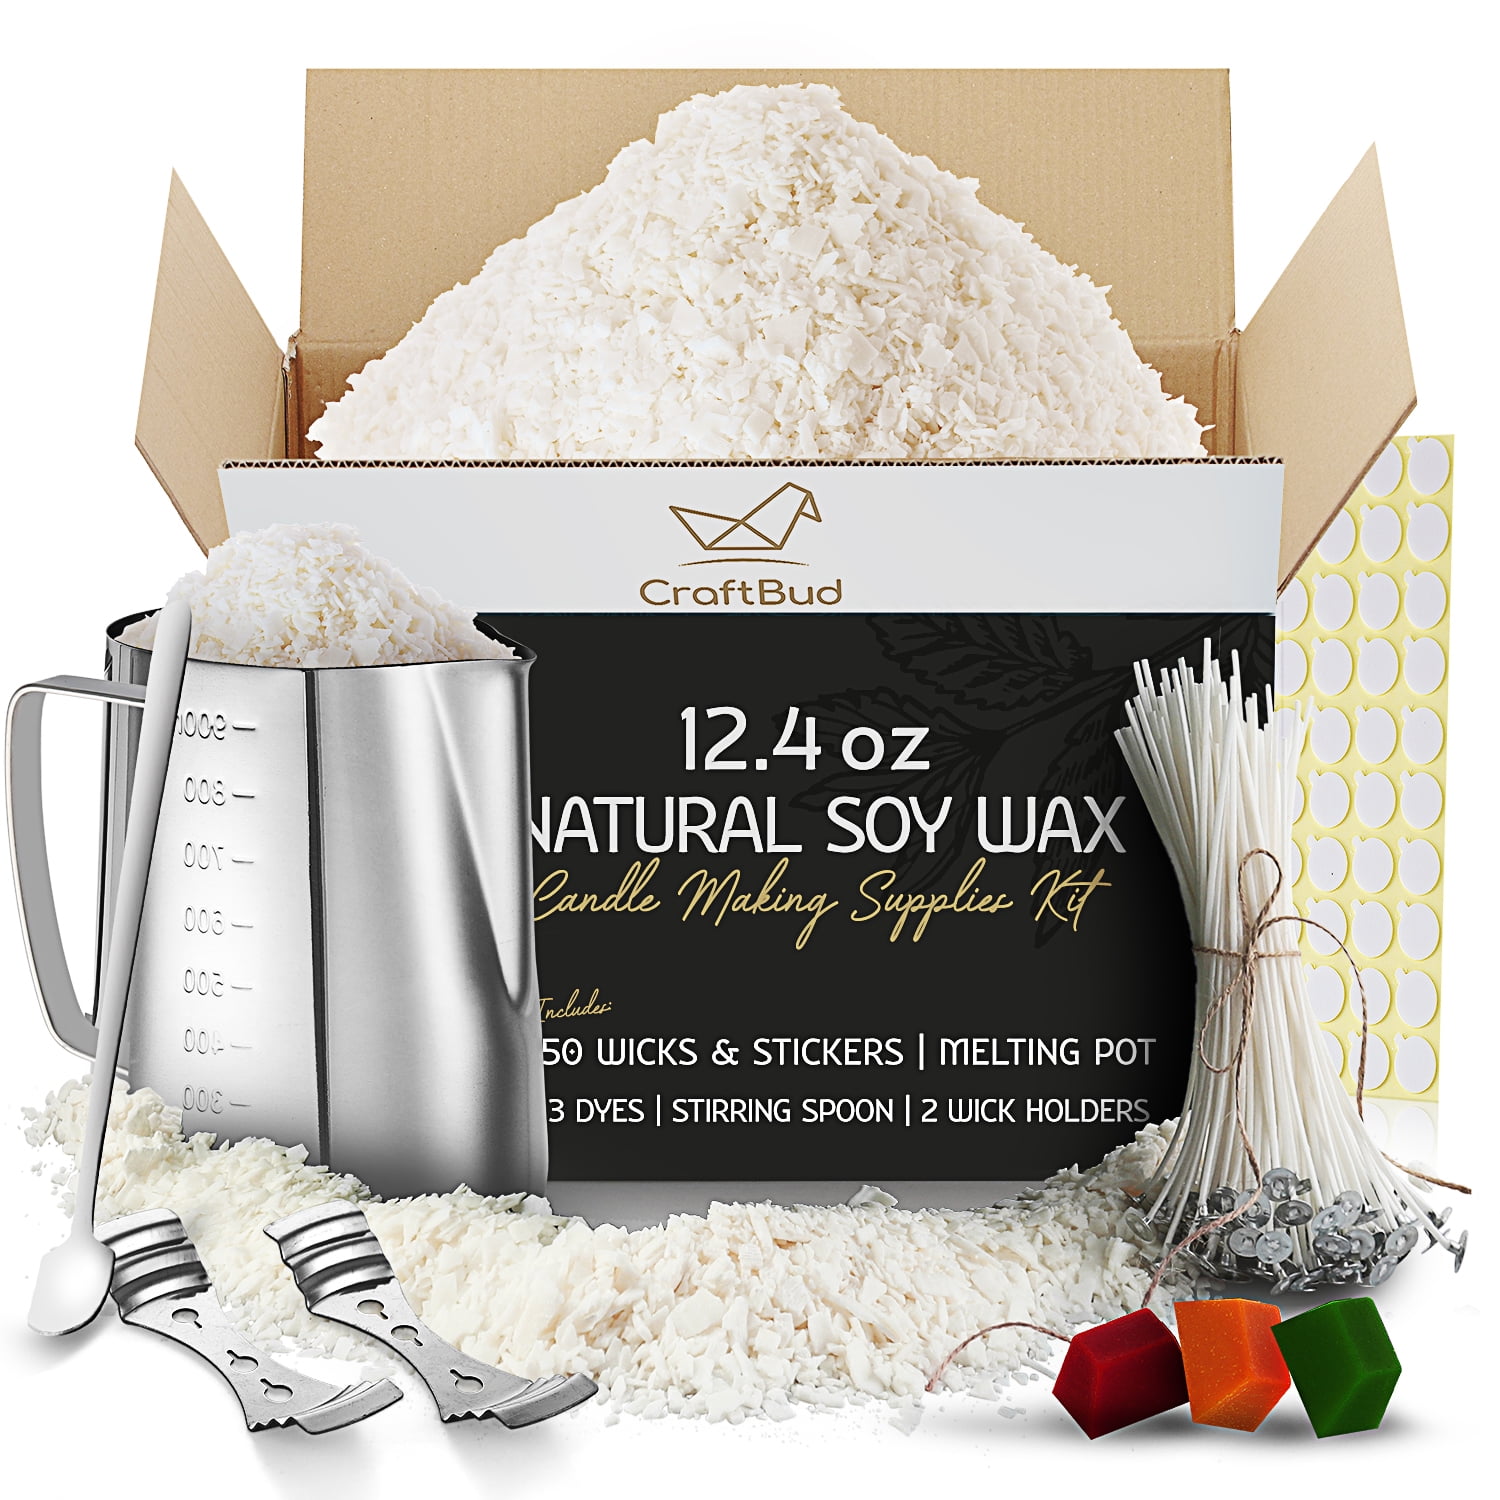 Craftbud Candle Making Kit for Adults, Soy Wax Candle Making Kit, 12.4 oz.  Soy Wax Flakes, Cotton Wicks, Dye Blocks, Melting Pot & Accessories